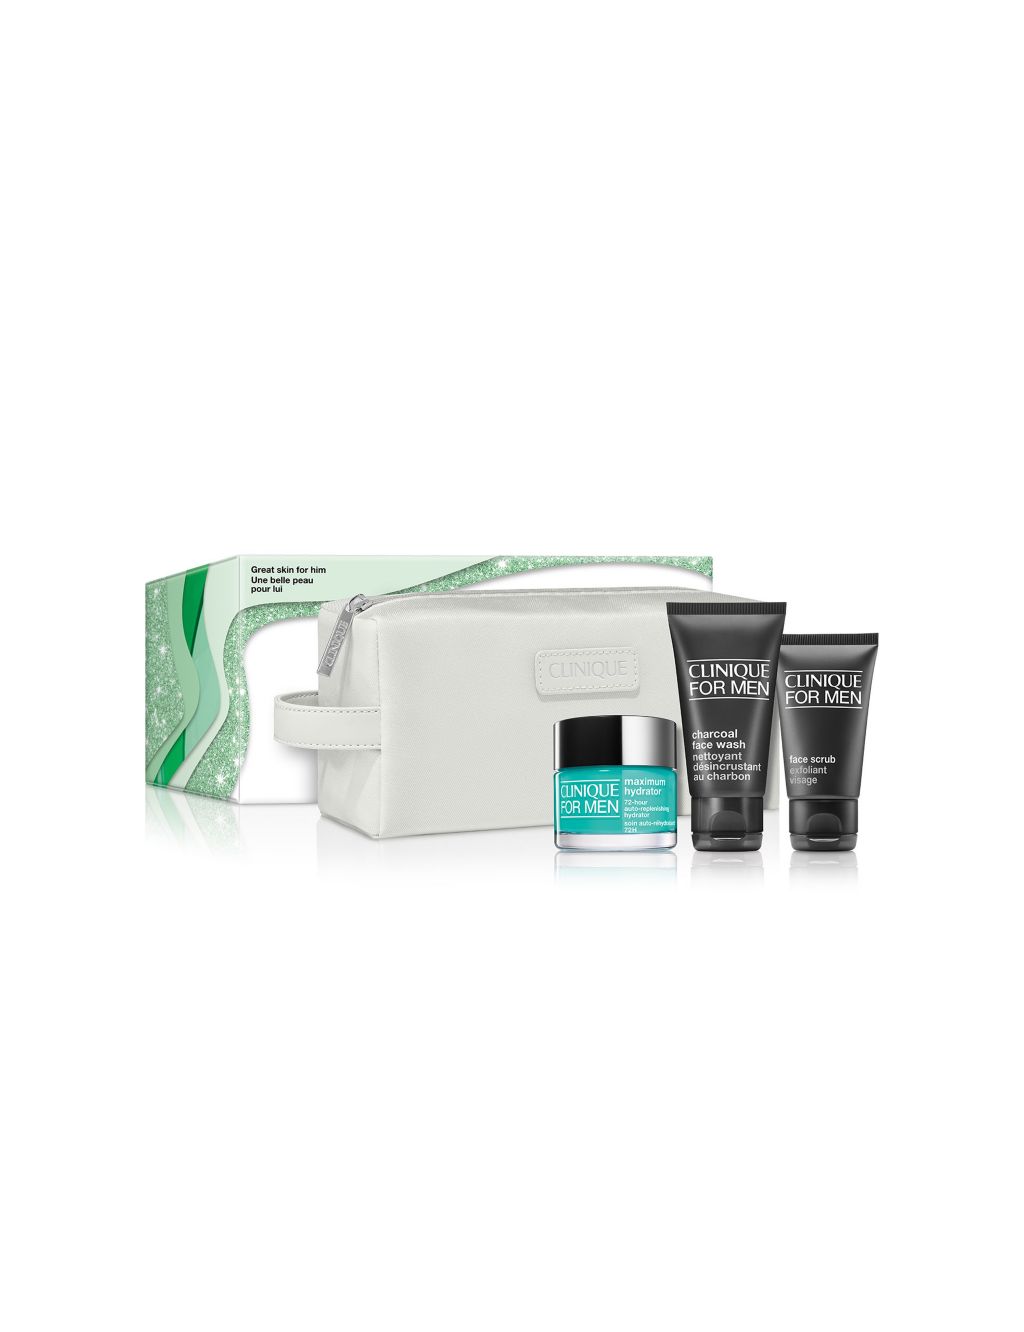 Clinique Great Skin For Him: Men’s Skincare Gift Set